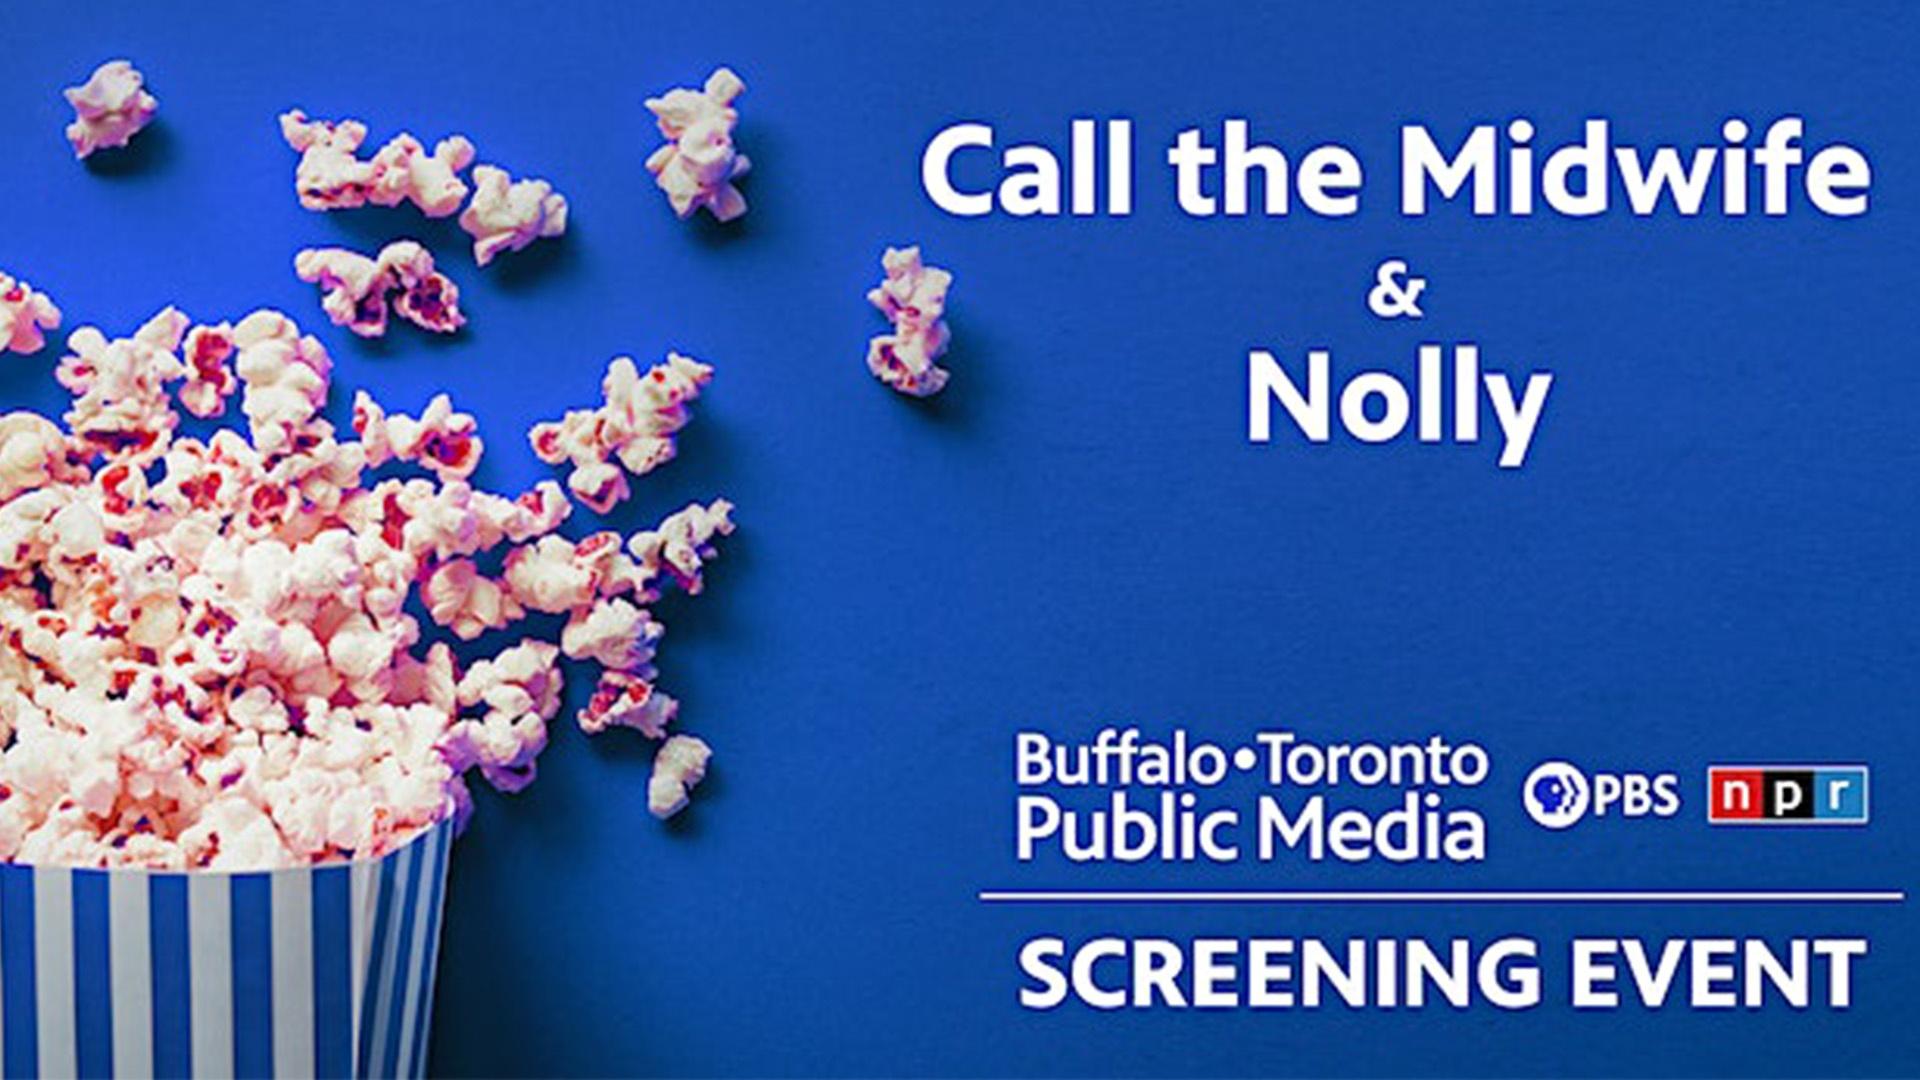 Call The Midwife & Nolly Screening Event with a blue background and a bucket of popcorn